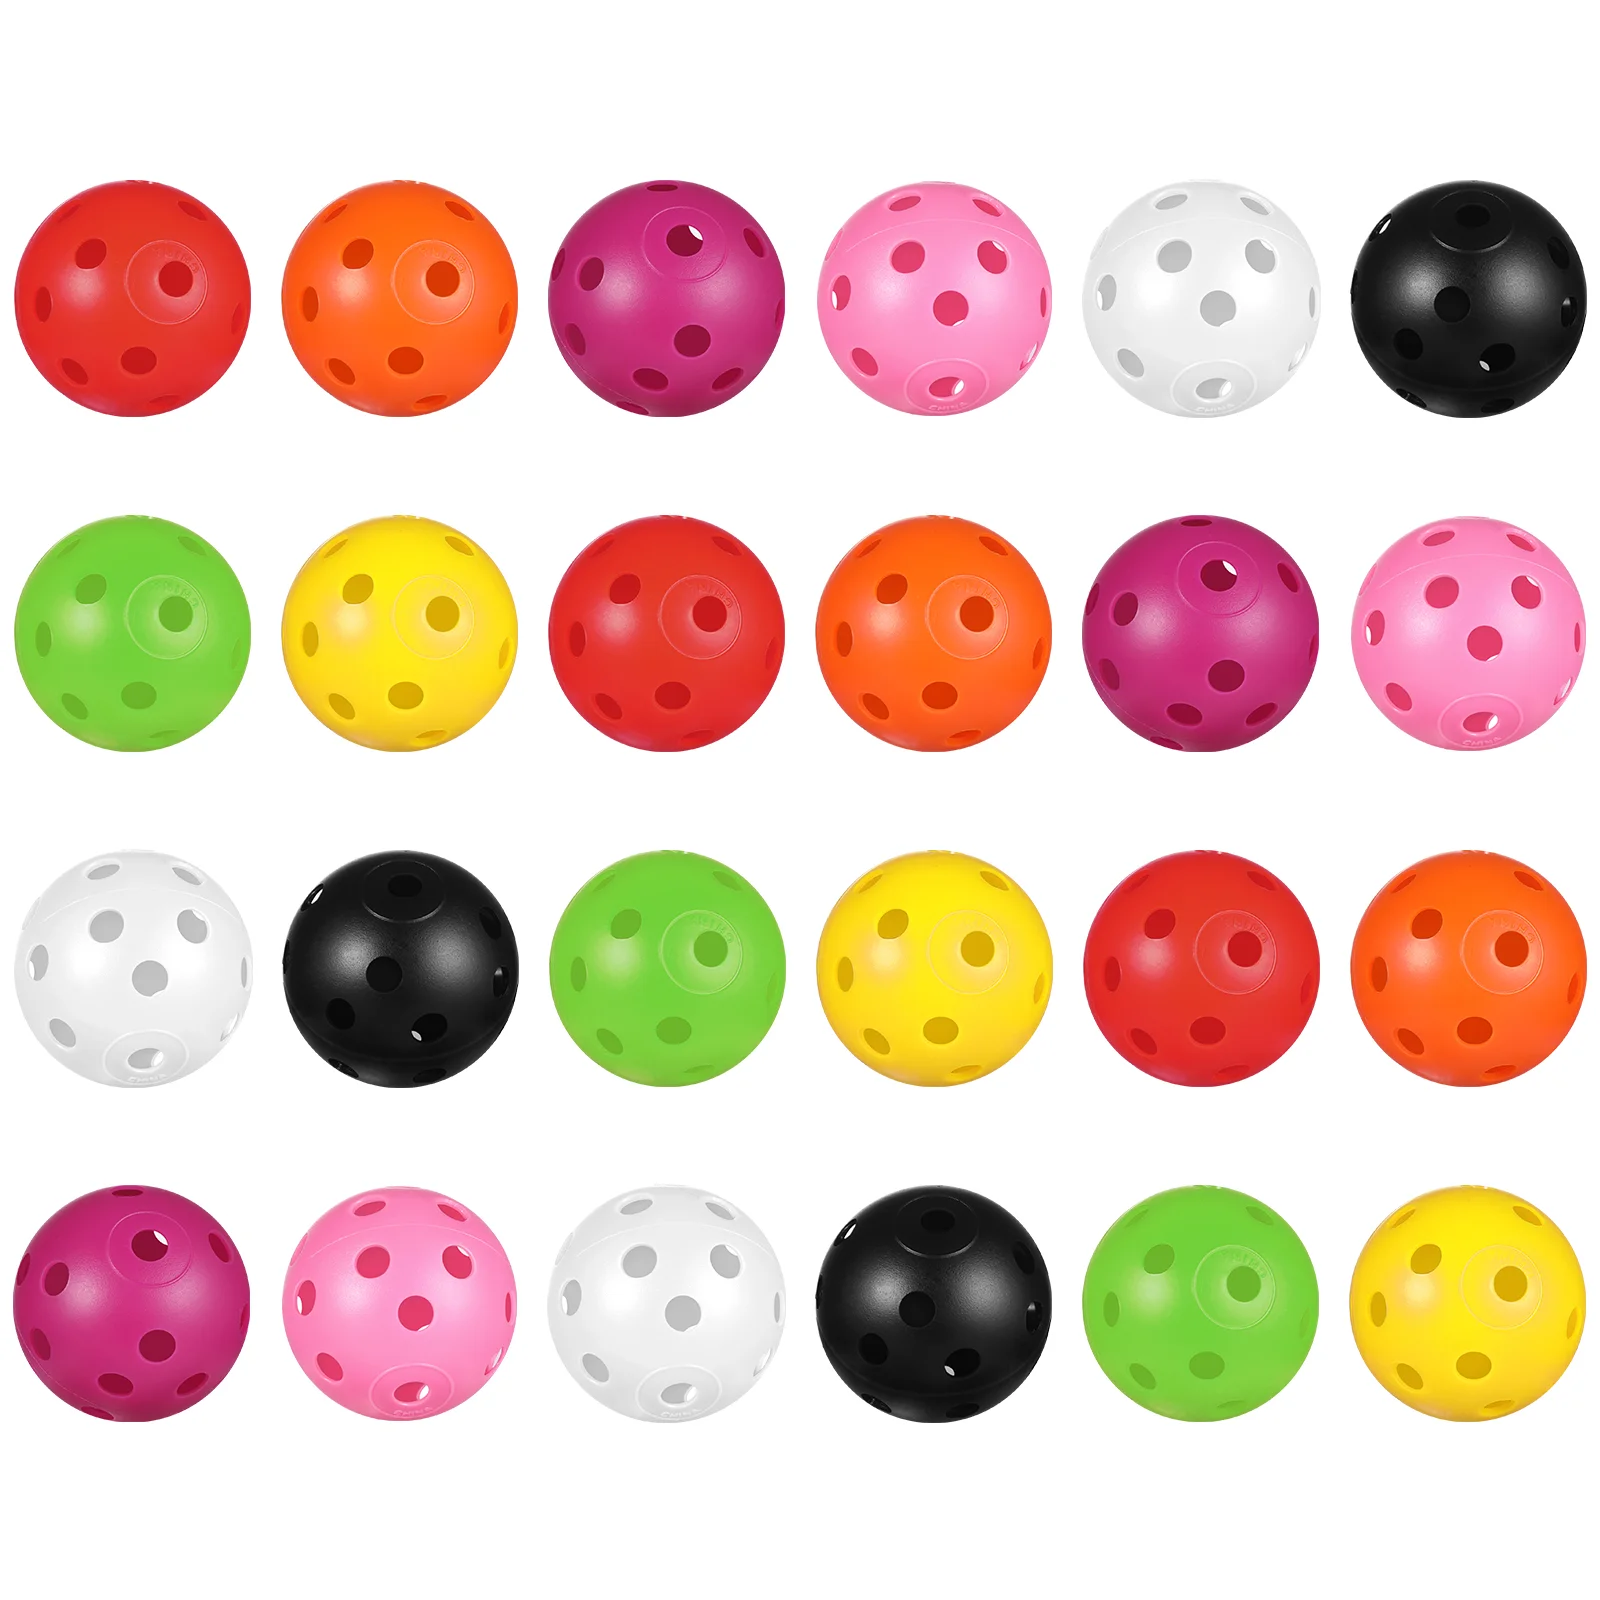 

TOYMYTOY 24pcs Perforated Plastic Play Balls Hollow Practice Training Sports Balls (Mixed Color)